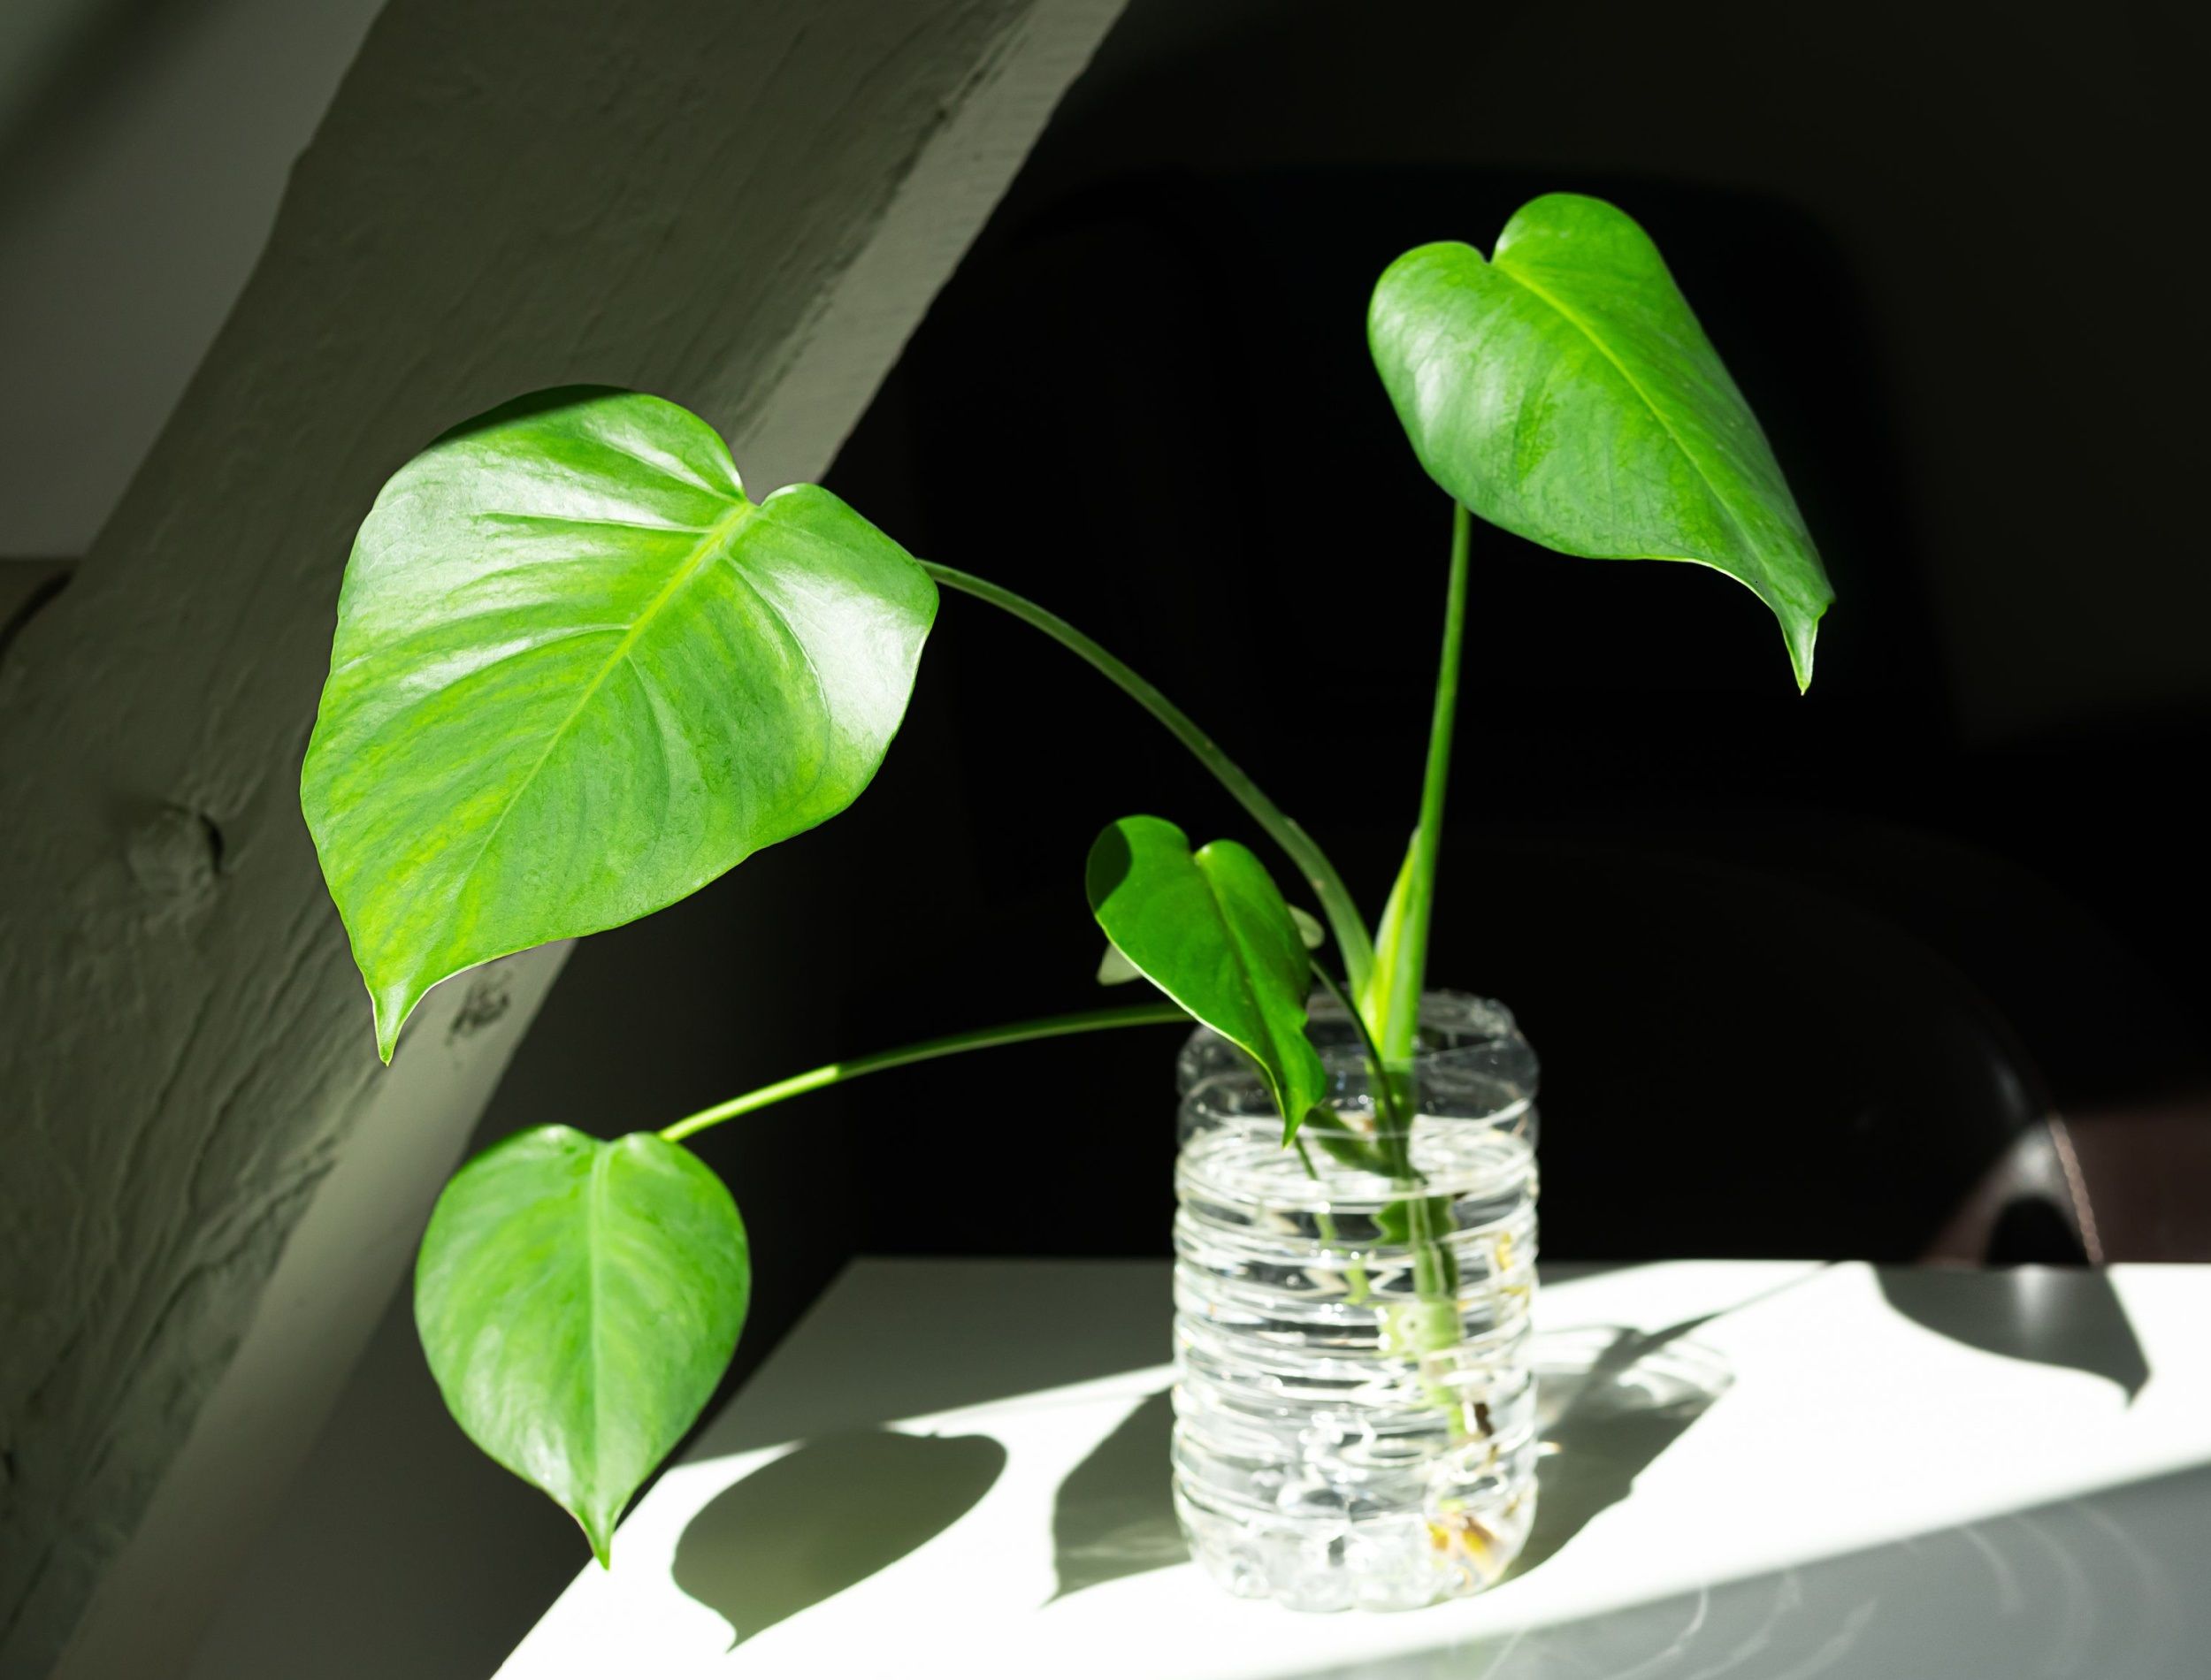 Young plant of Monstera deliciosa in water - propagation of Swiss cheese plant, home gardening and connecting with nature